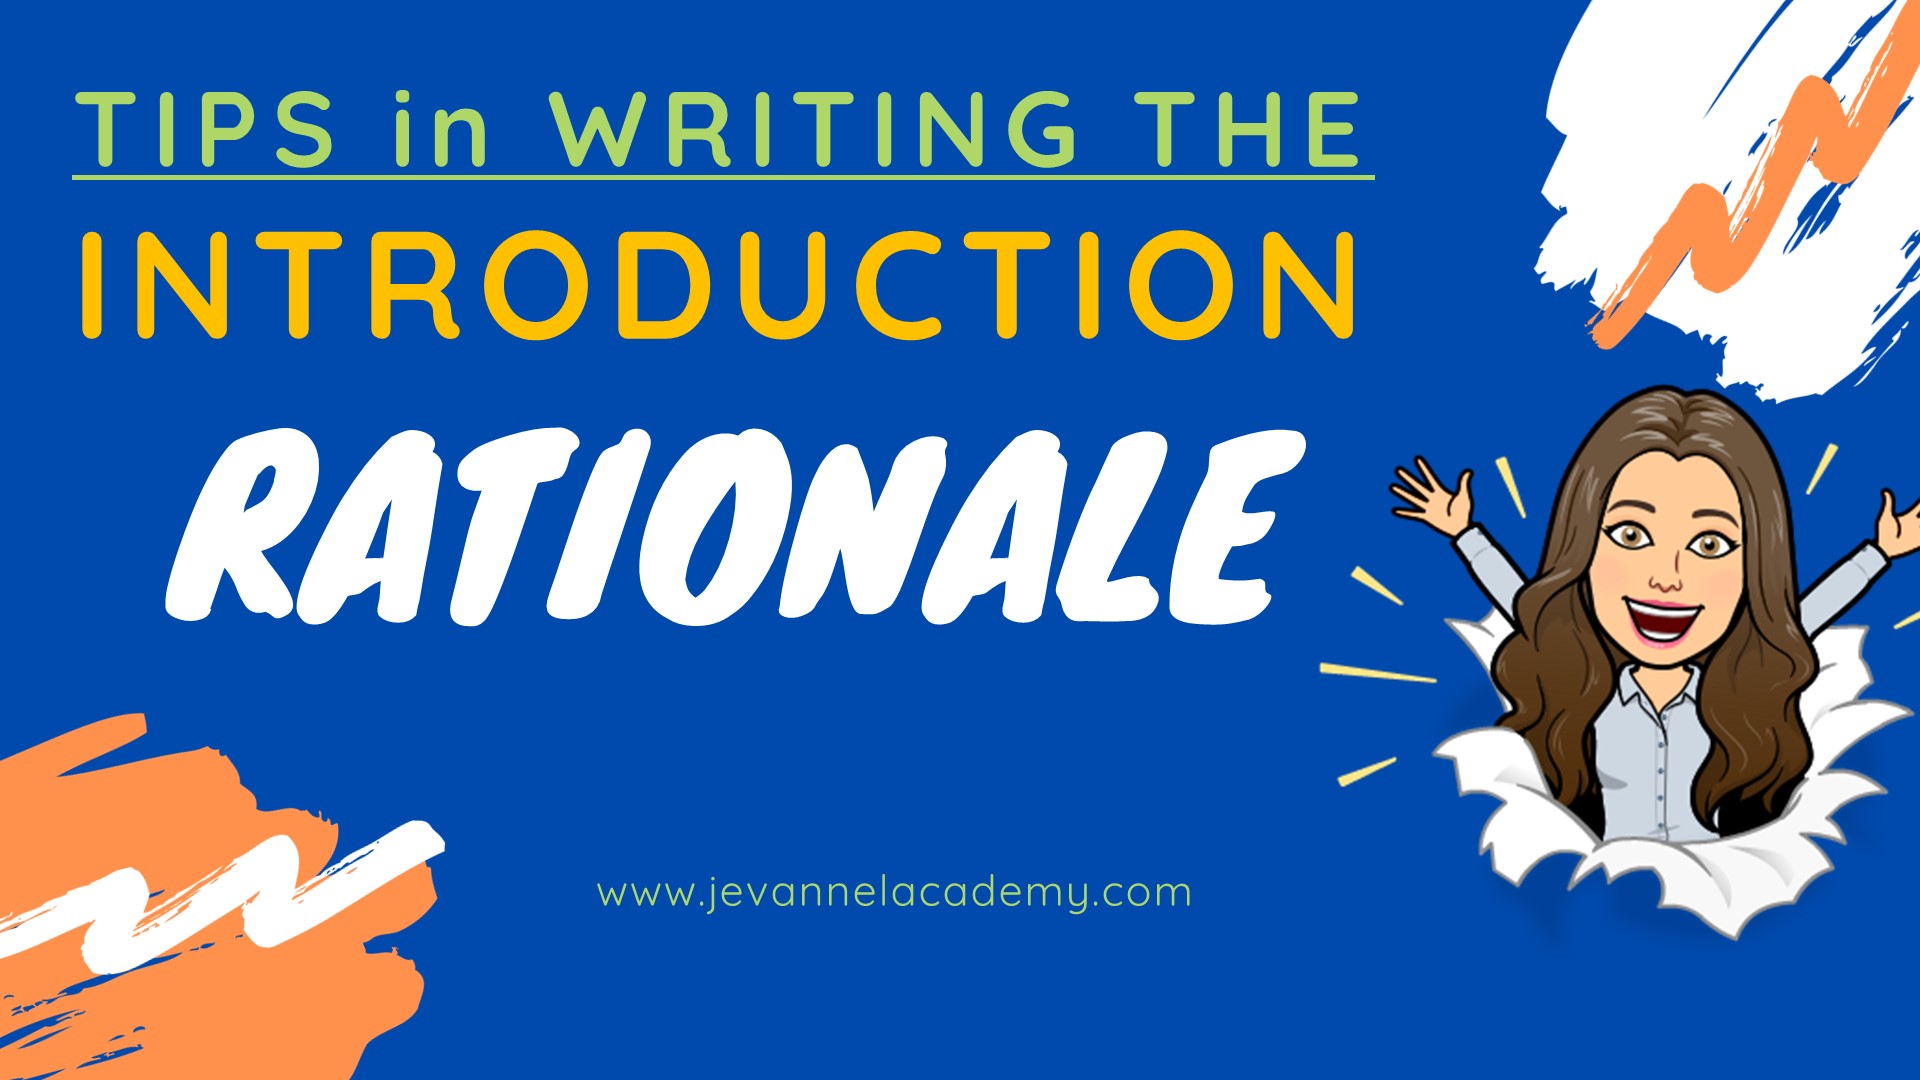 How to Write the Introduction - The Rationale